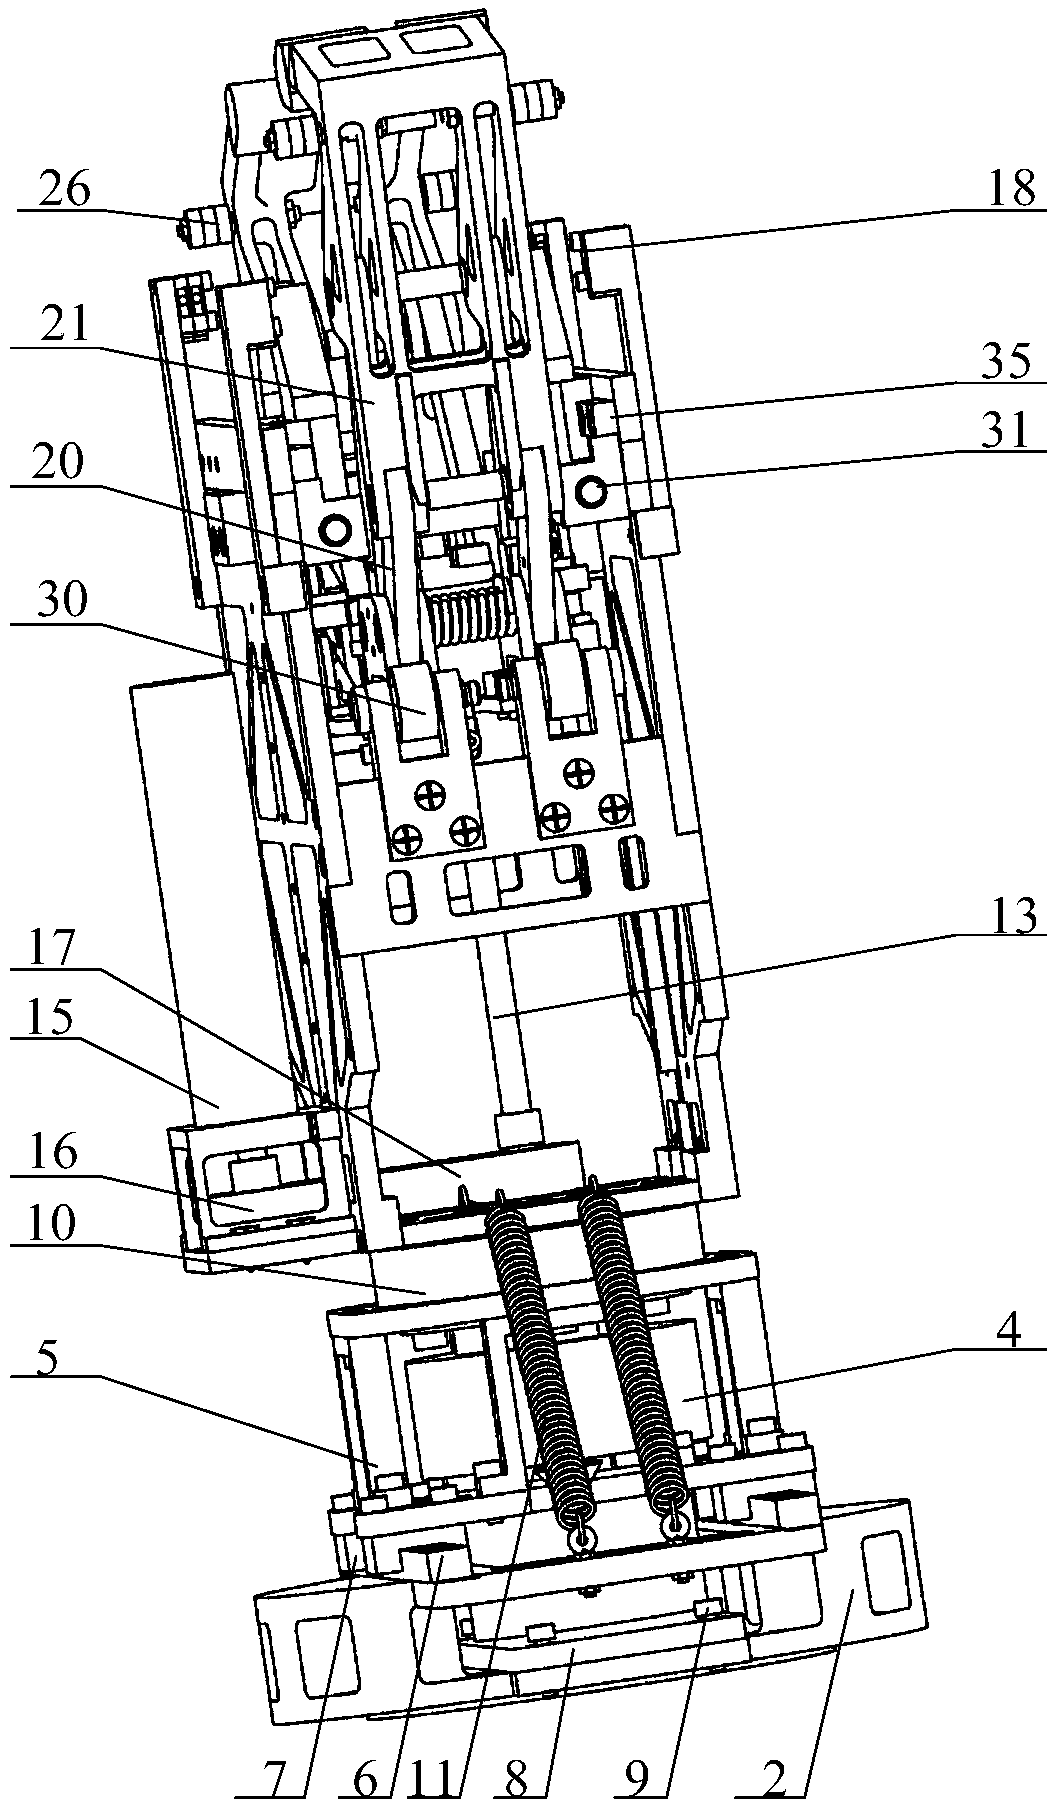 Non-cooperative target satellite acquisition device and acquisition method